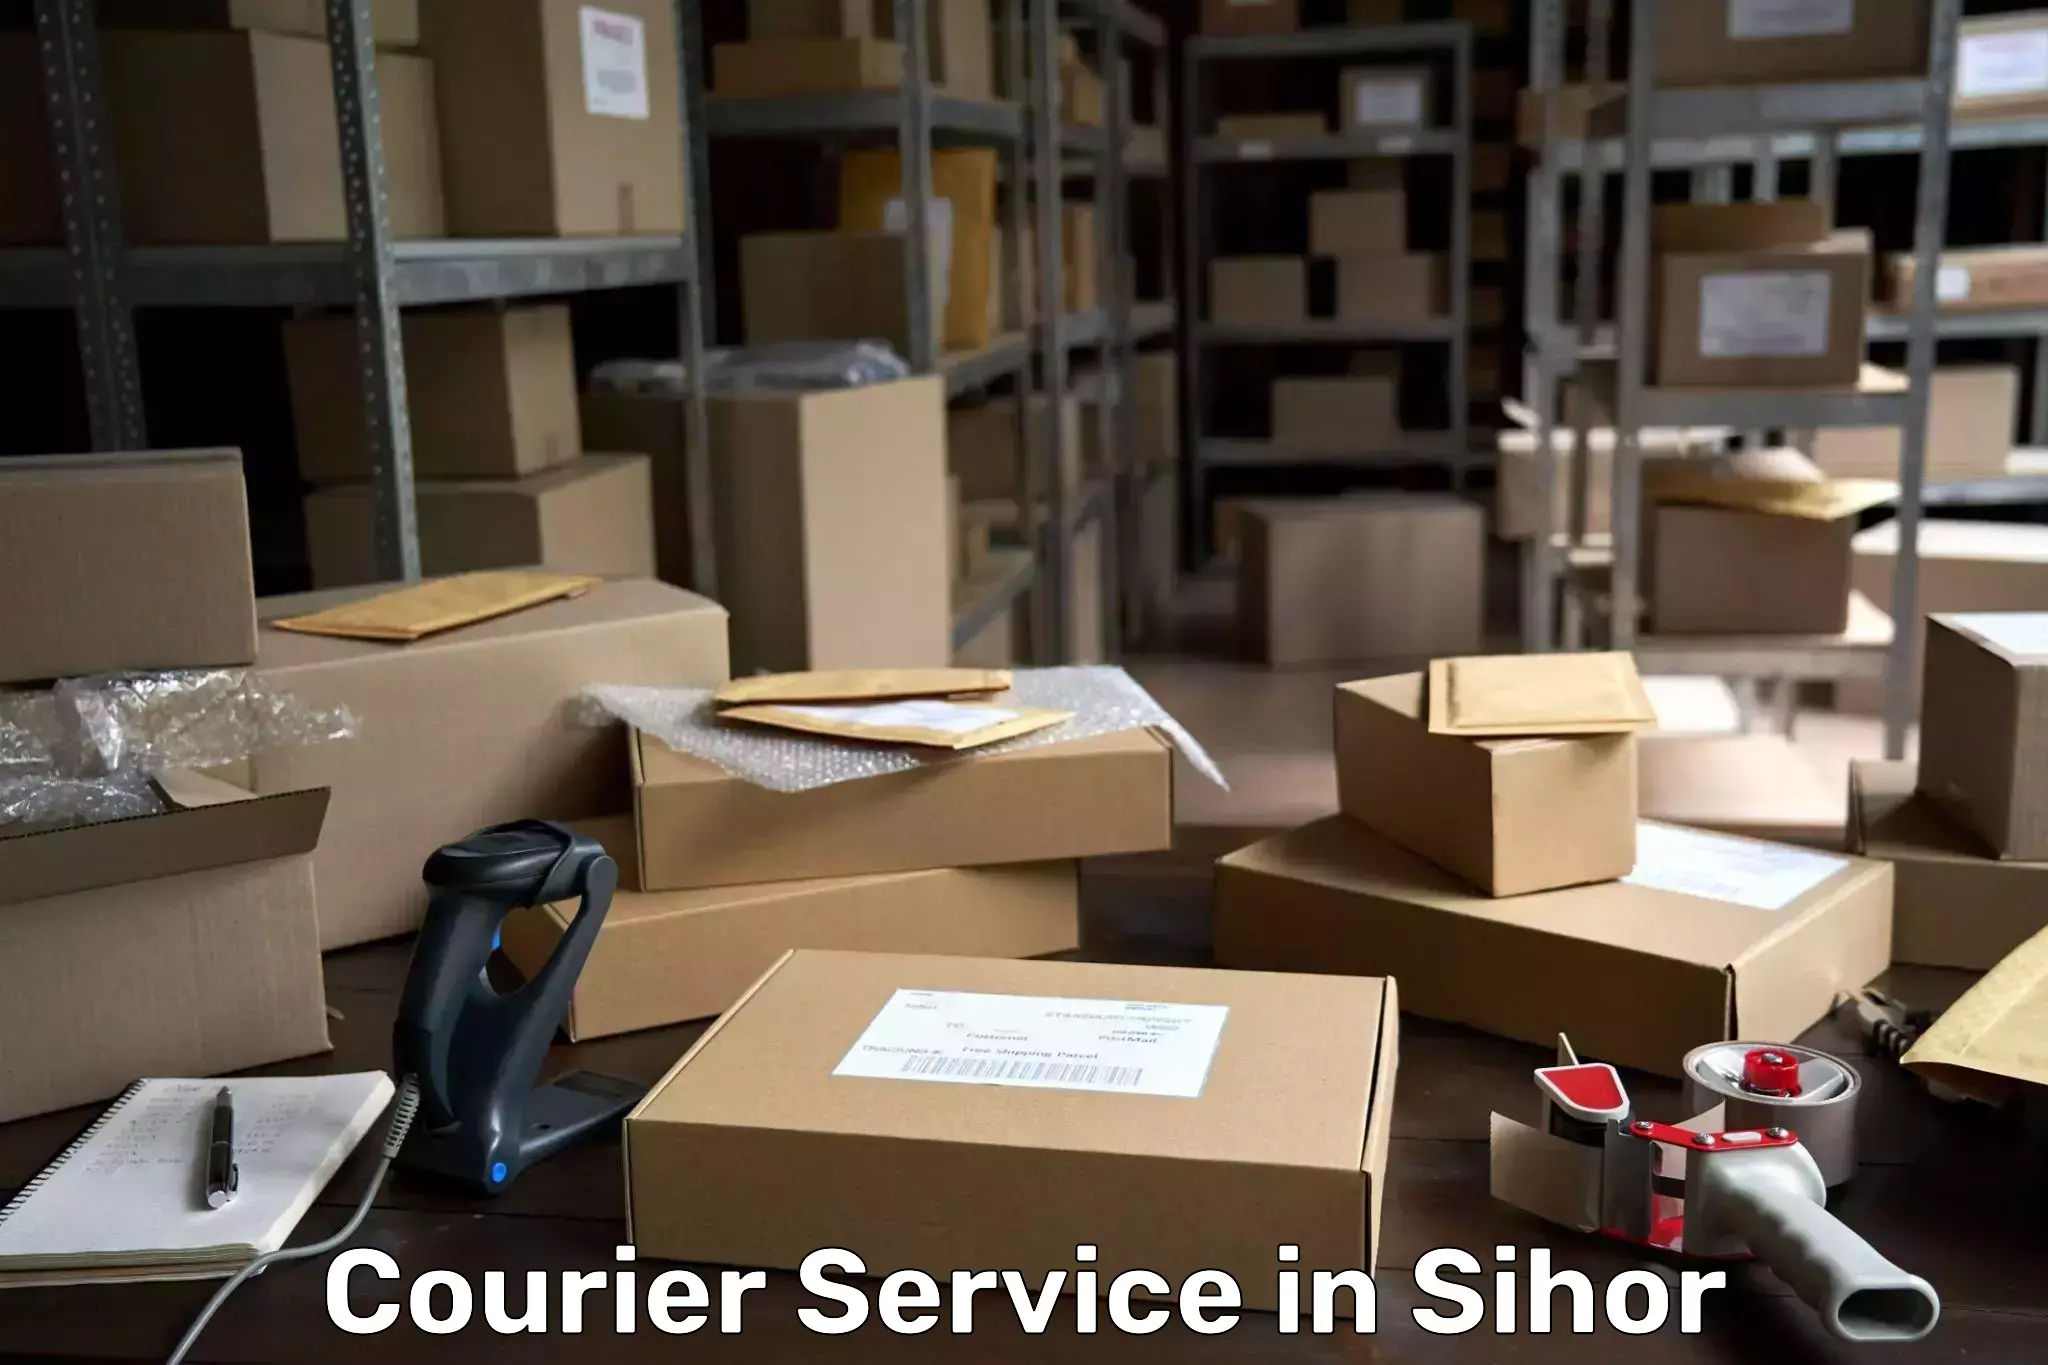 Personal courier services in Sihor